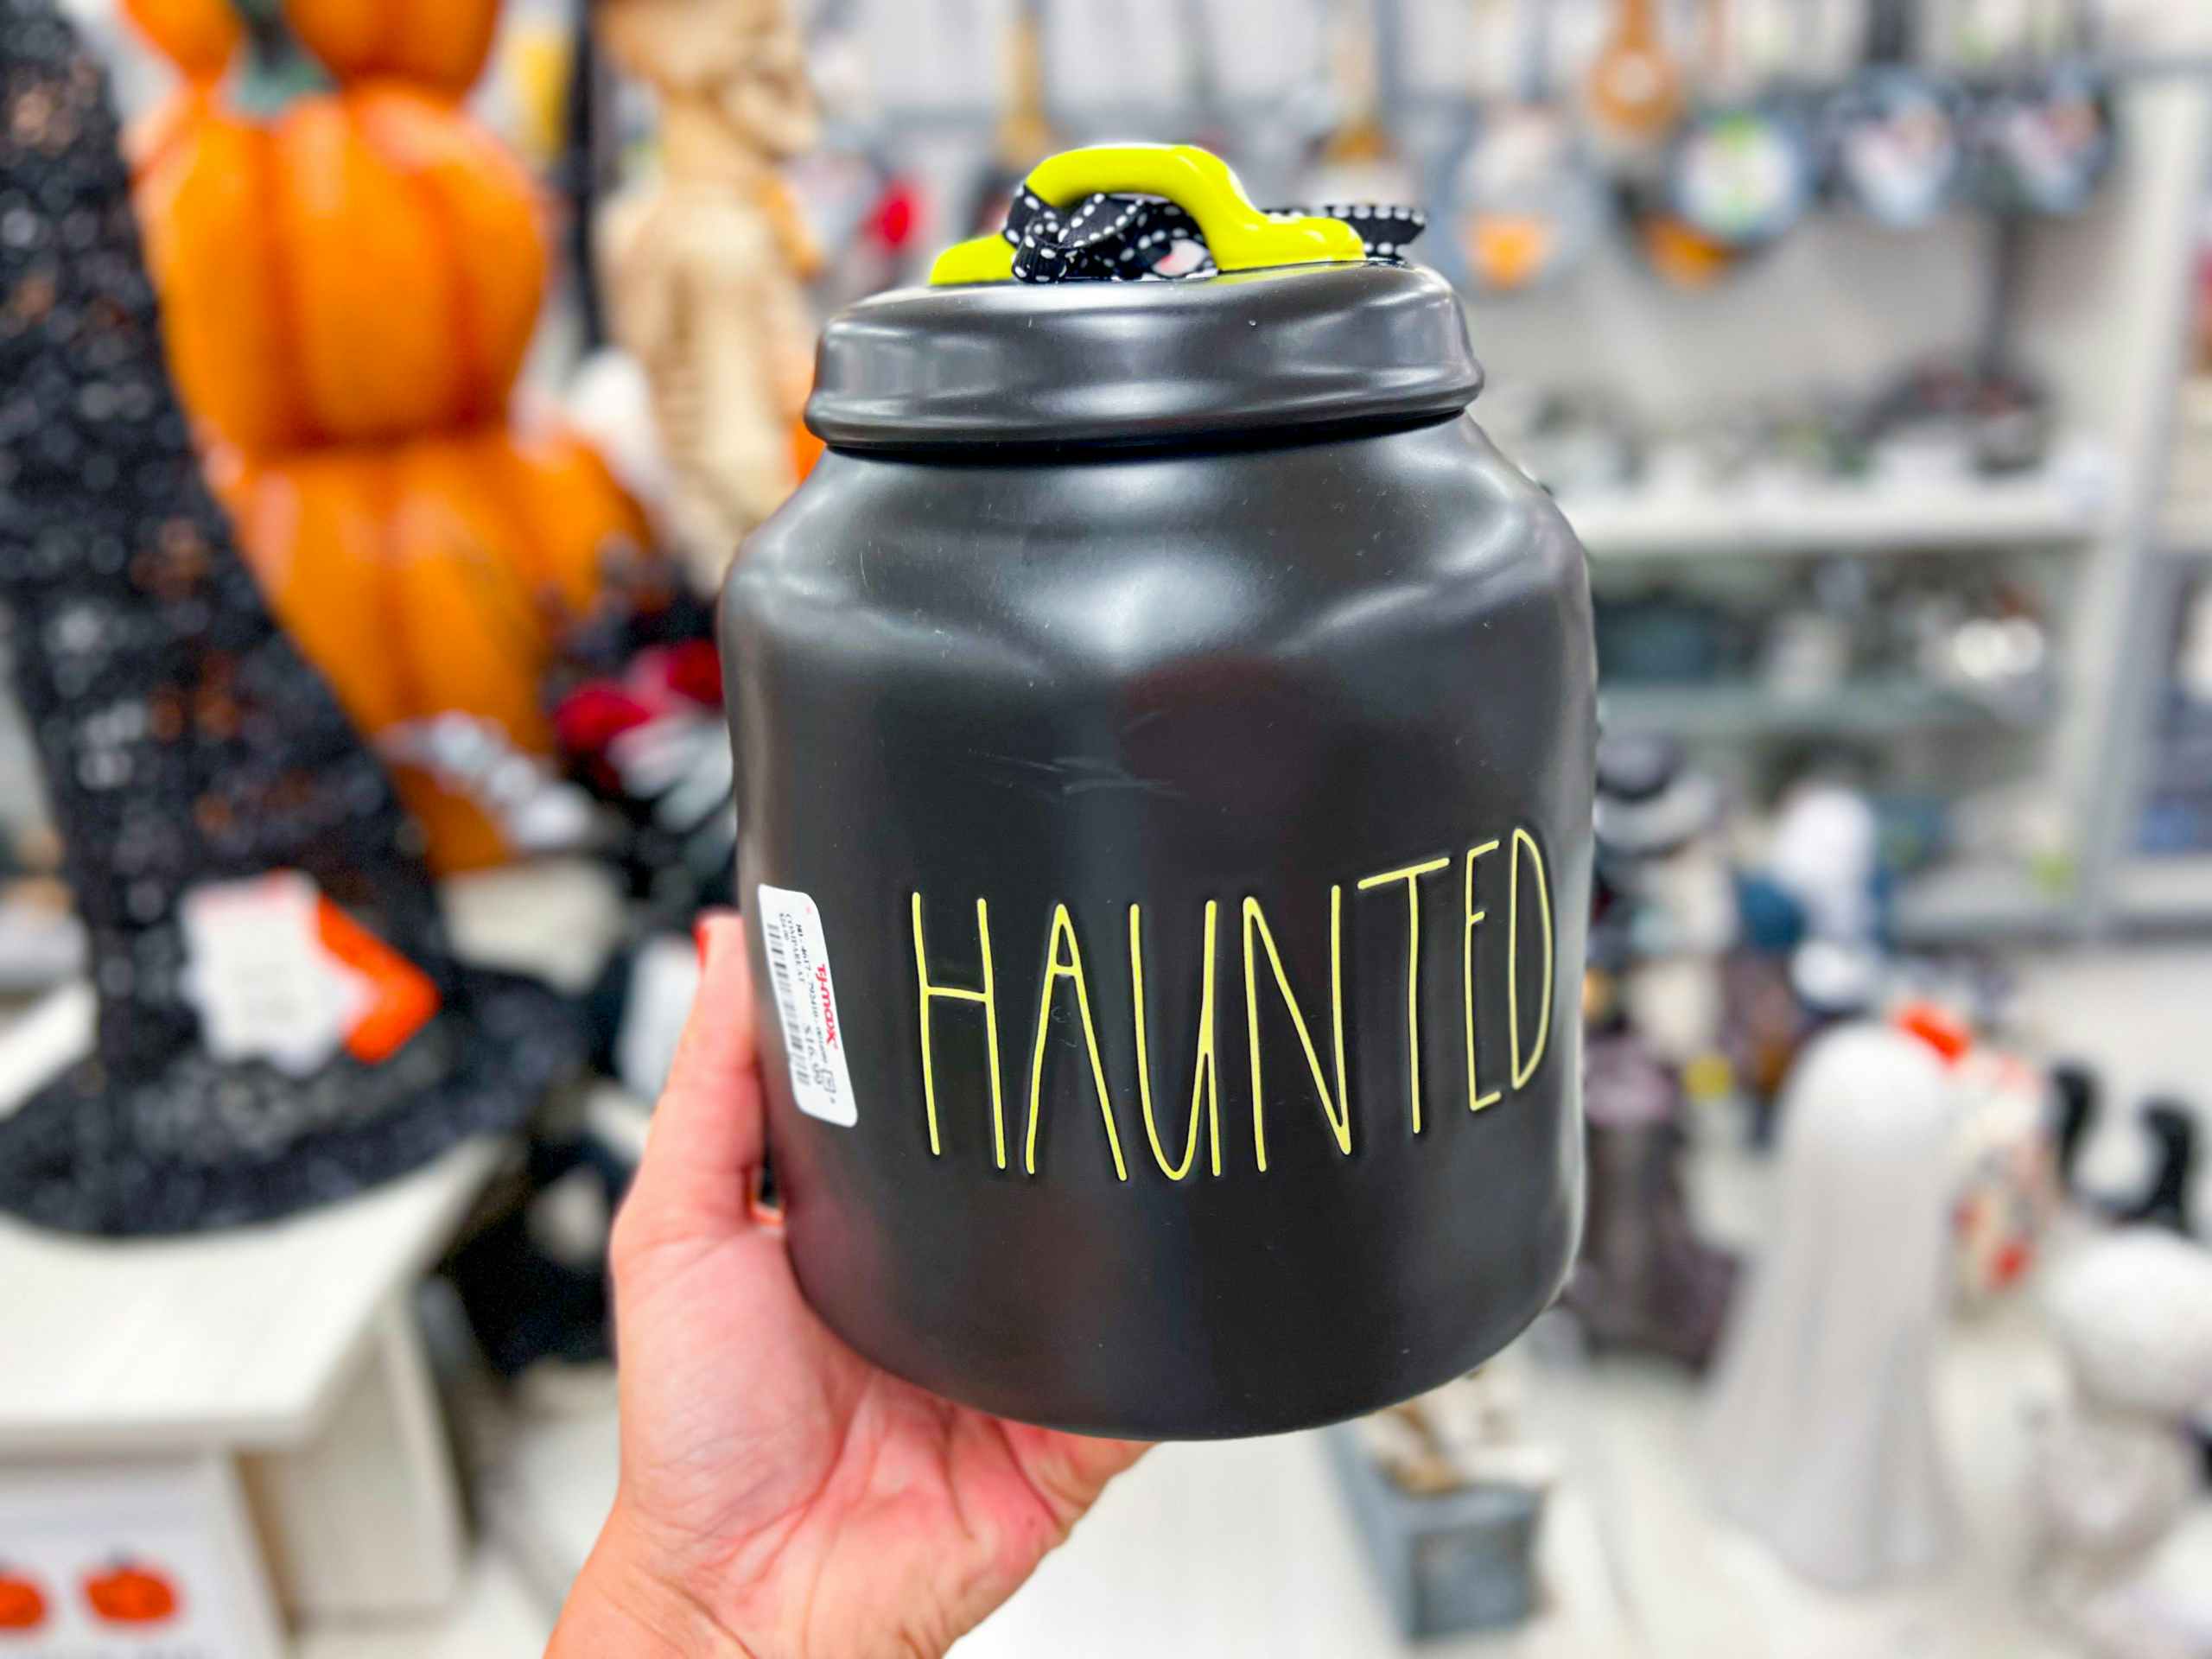 hand holding up a black rae dunn jar that says "haunted